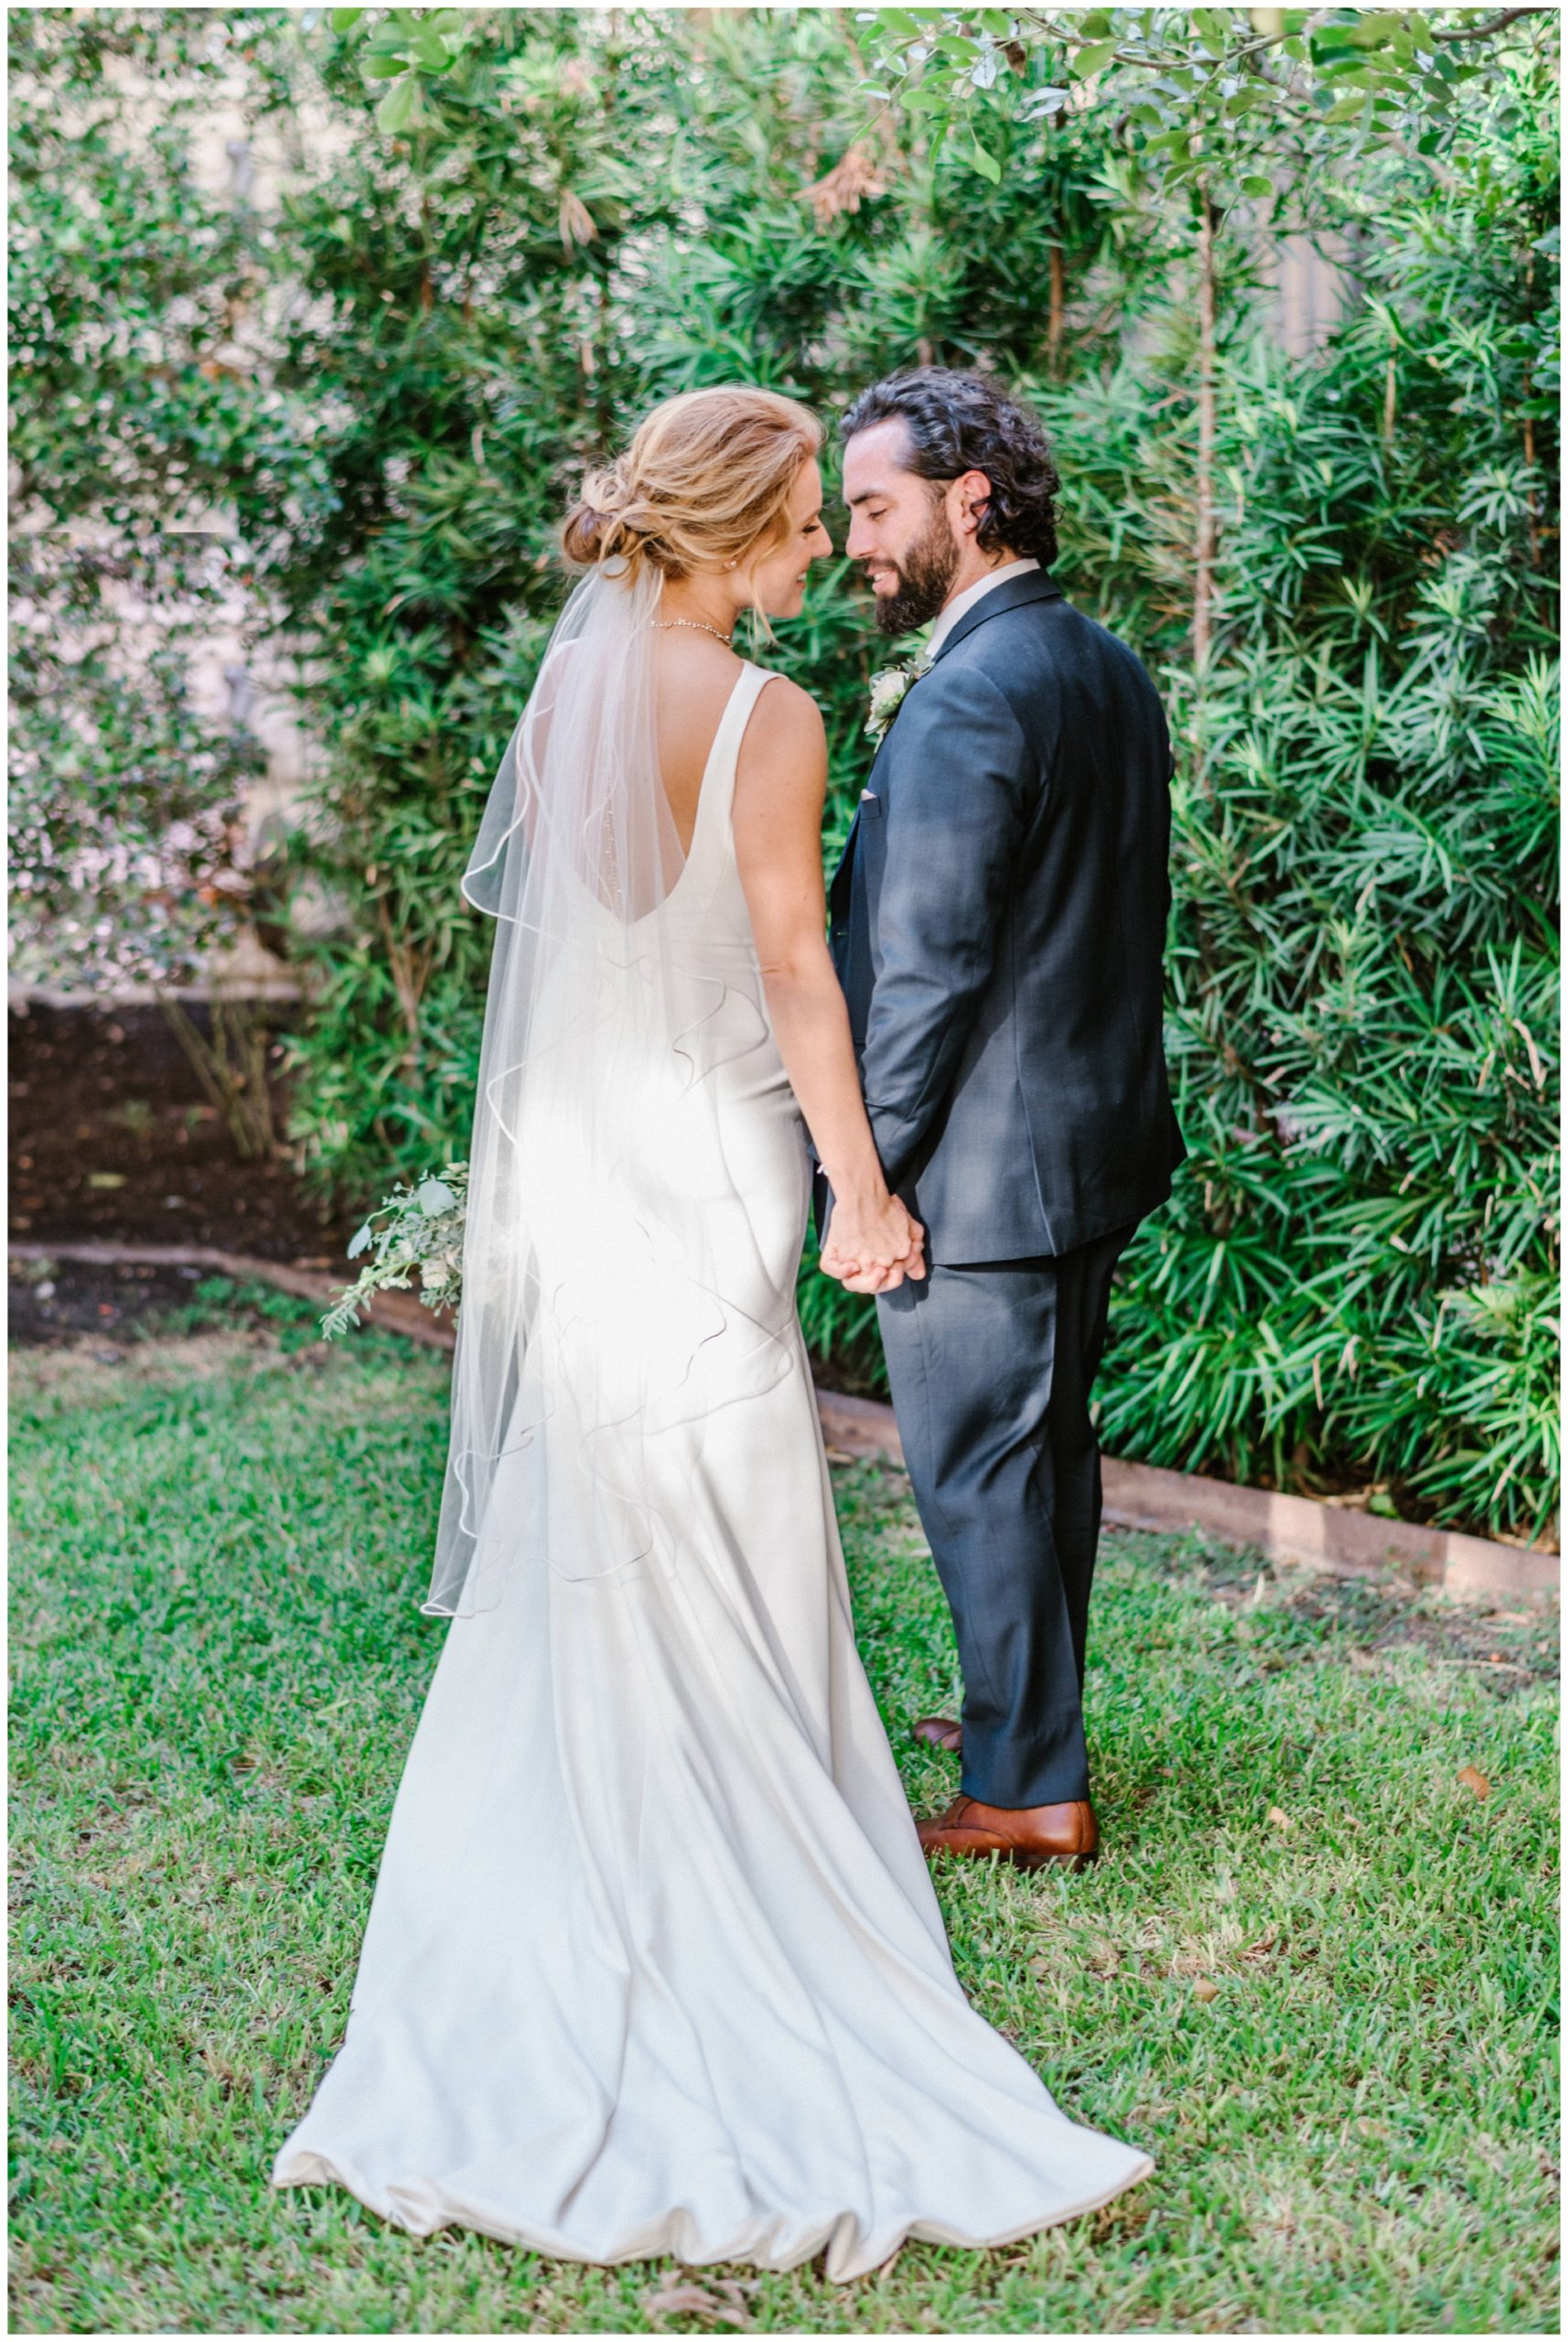 Bride in Devon by The from Unbridaled | Austin Wedding Photography by Joslyn Holtfort